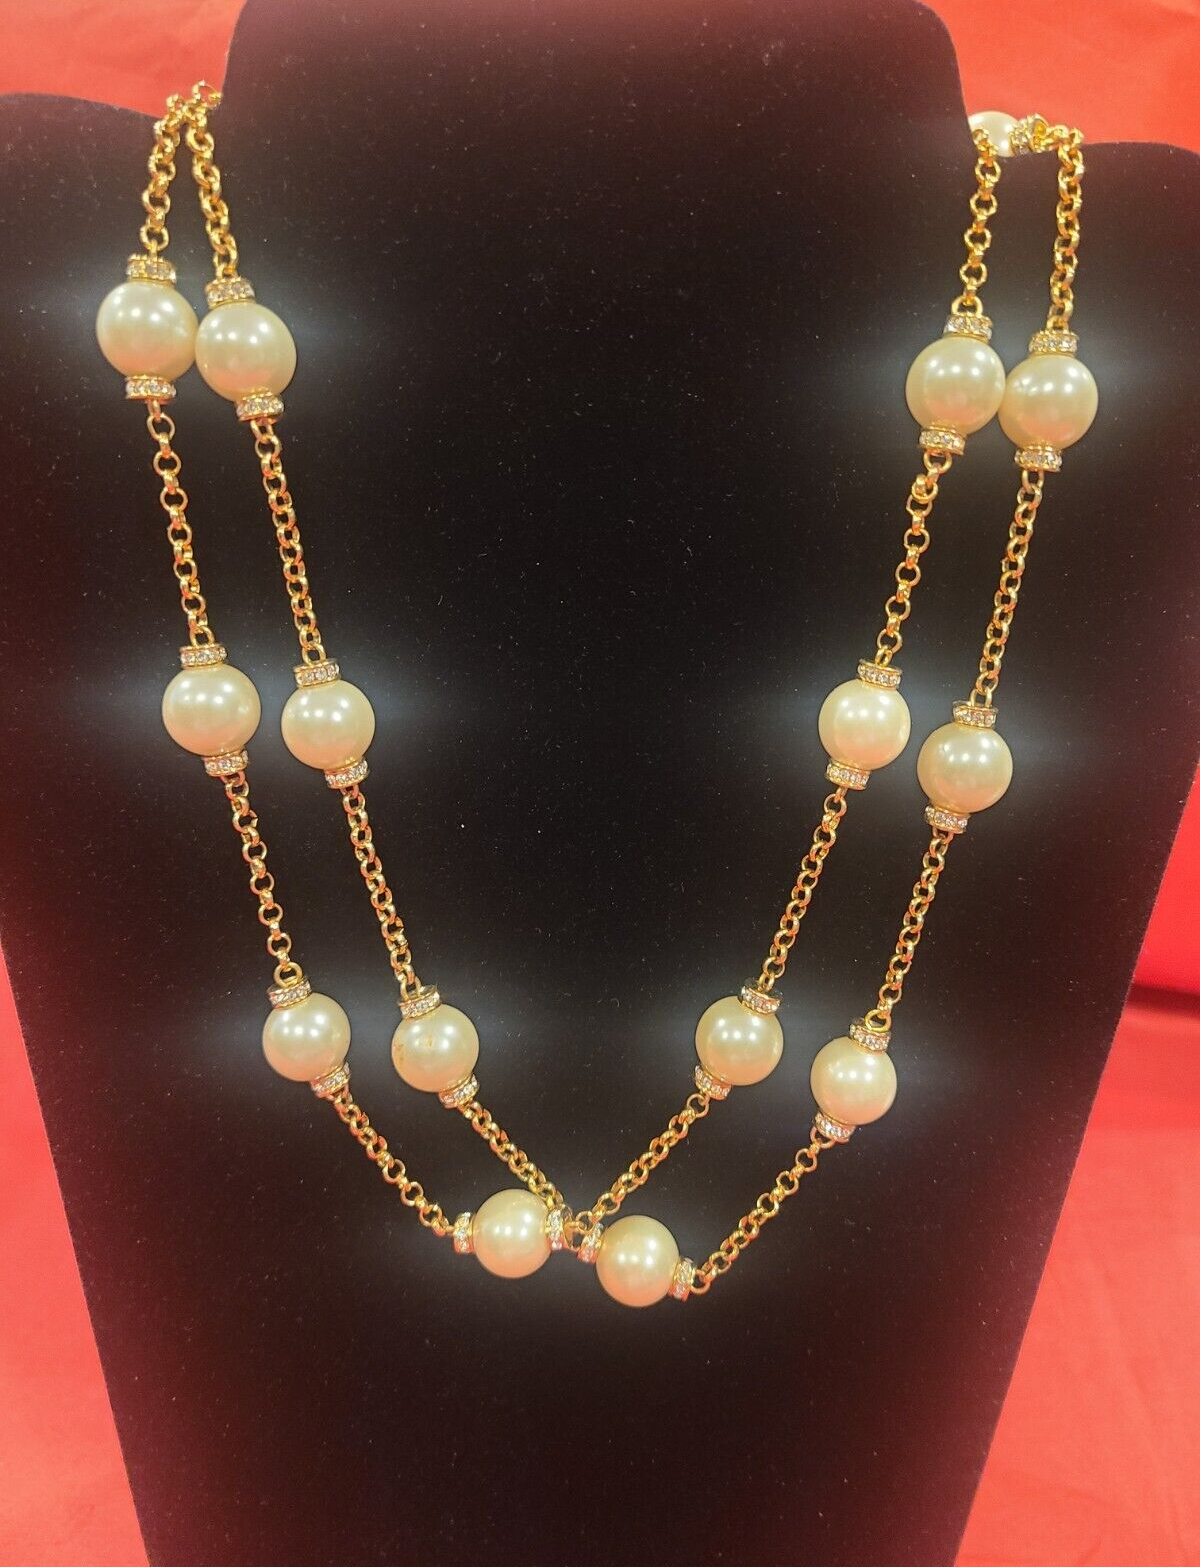 Primary image for Striking JOAN RIVERS Gold Tone Faux Pearl Rhinestone Rondelle 42" Chain Necklace